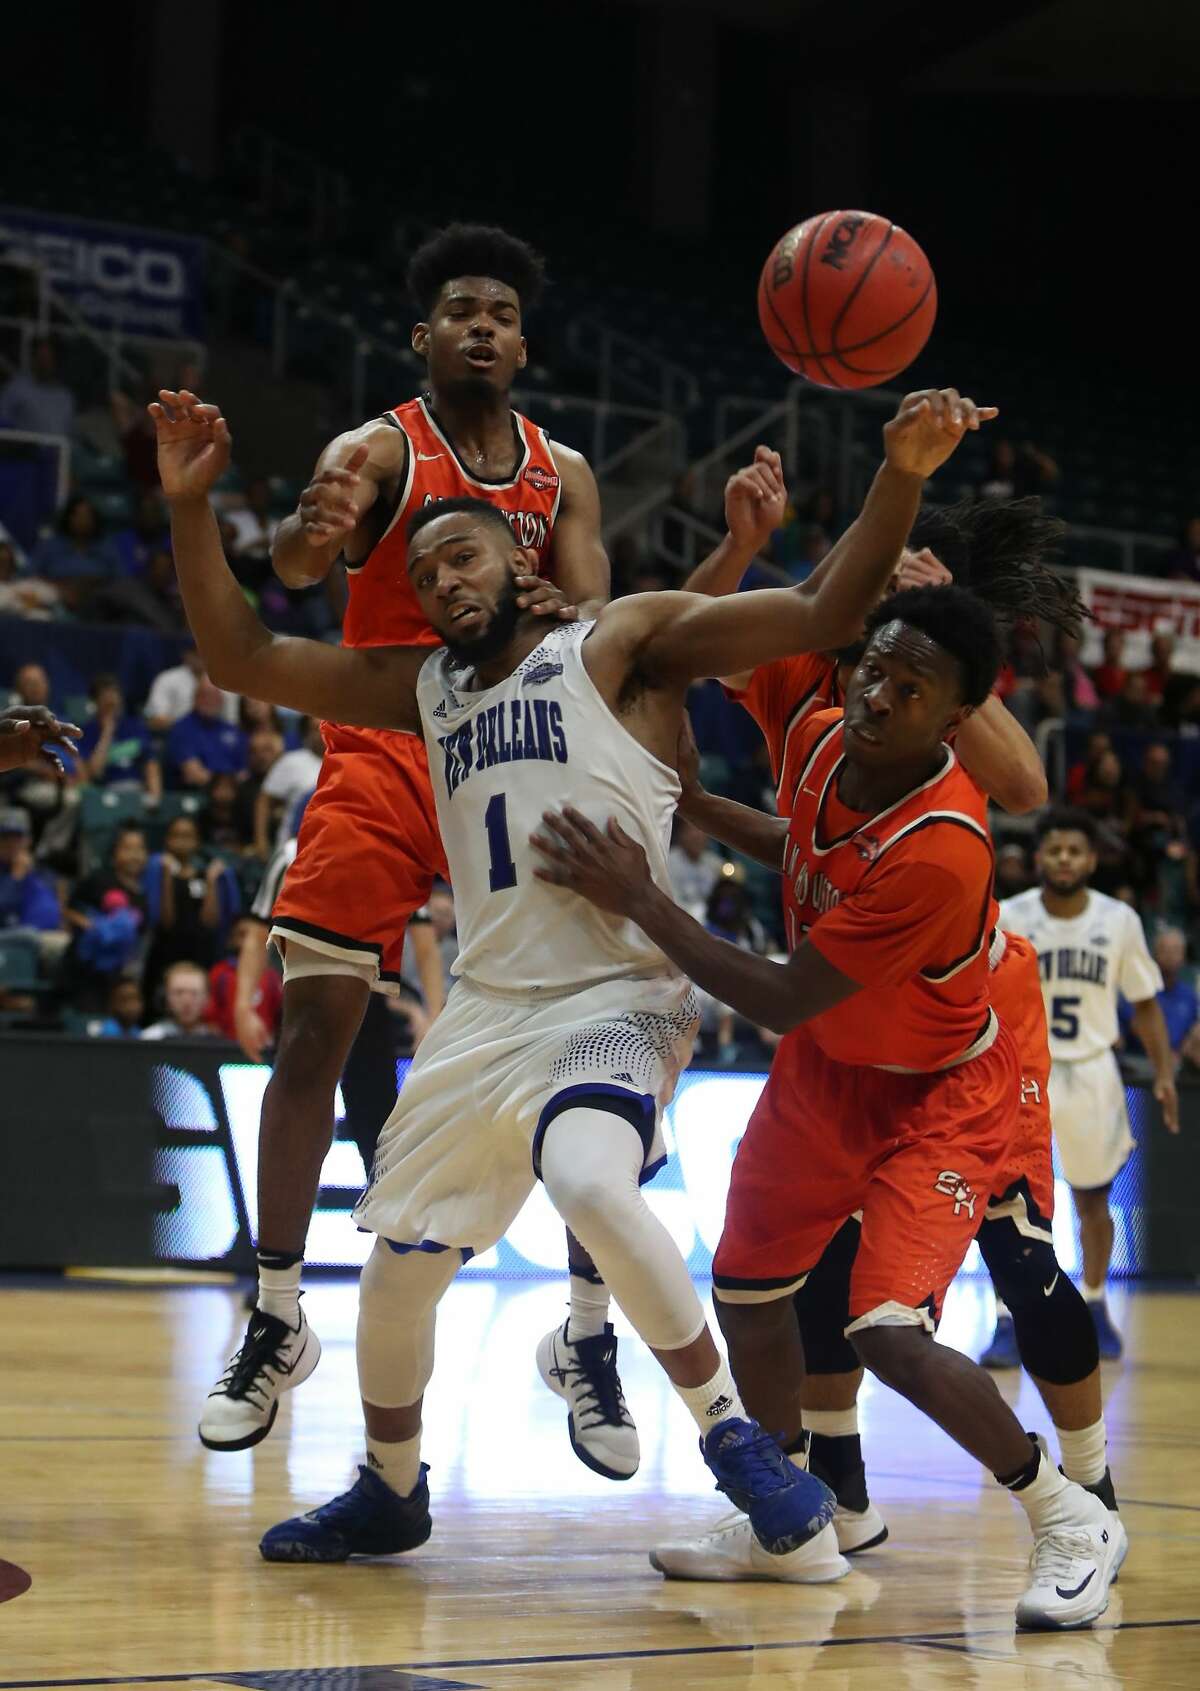 New Orleans guard Tevin Broyles (1) is swarmed by Sam Houston State defenders while fighting for a loose ball during second-half action in The Southland Conference Basketball Tournament in the Leonard E. Merrell Center Friday, March 10, 2017, in Katy. ( Steve Gonzales / Houston Chronicle )